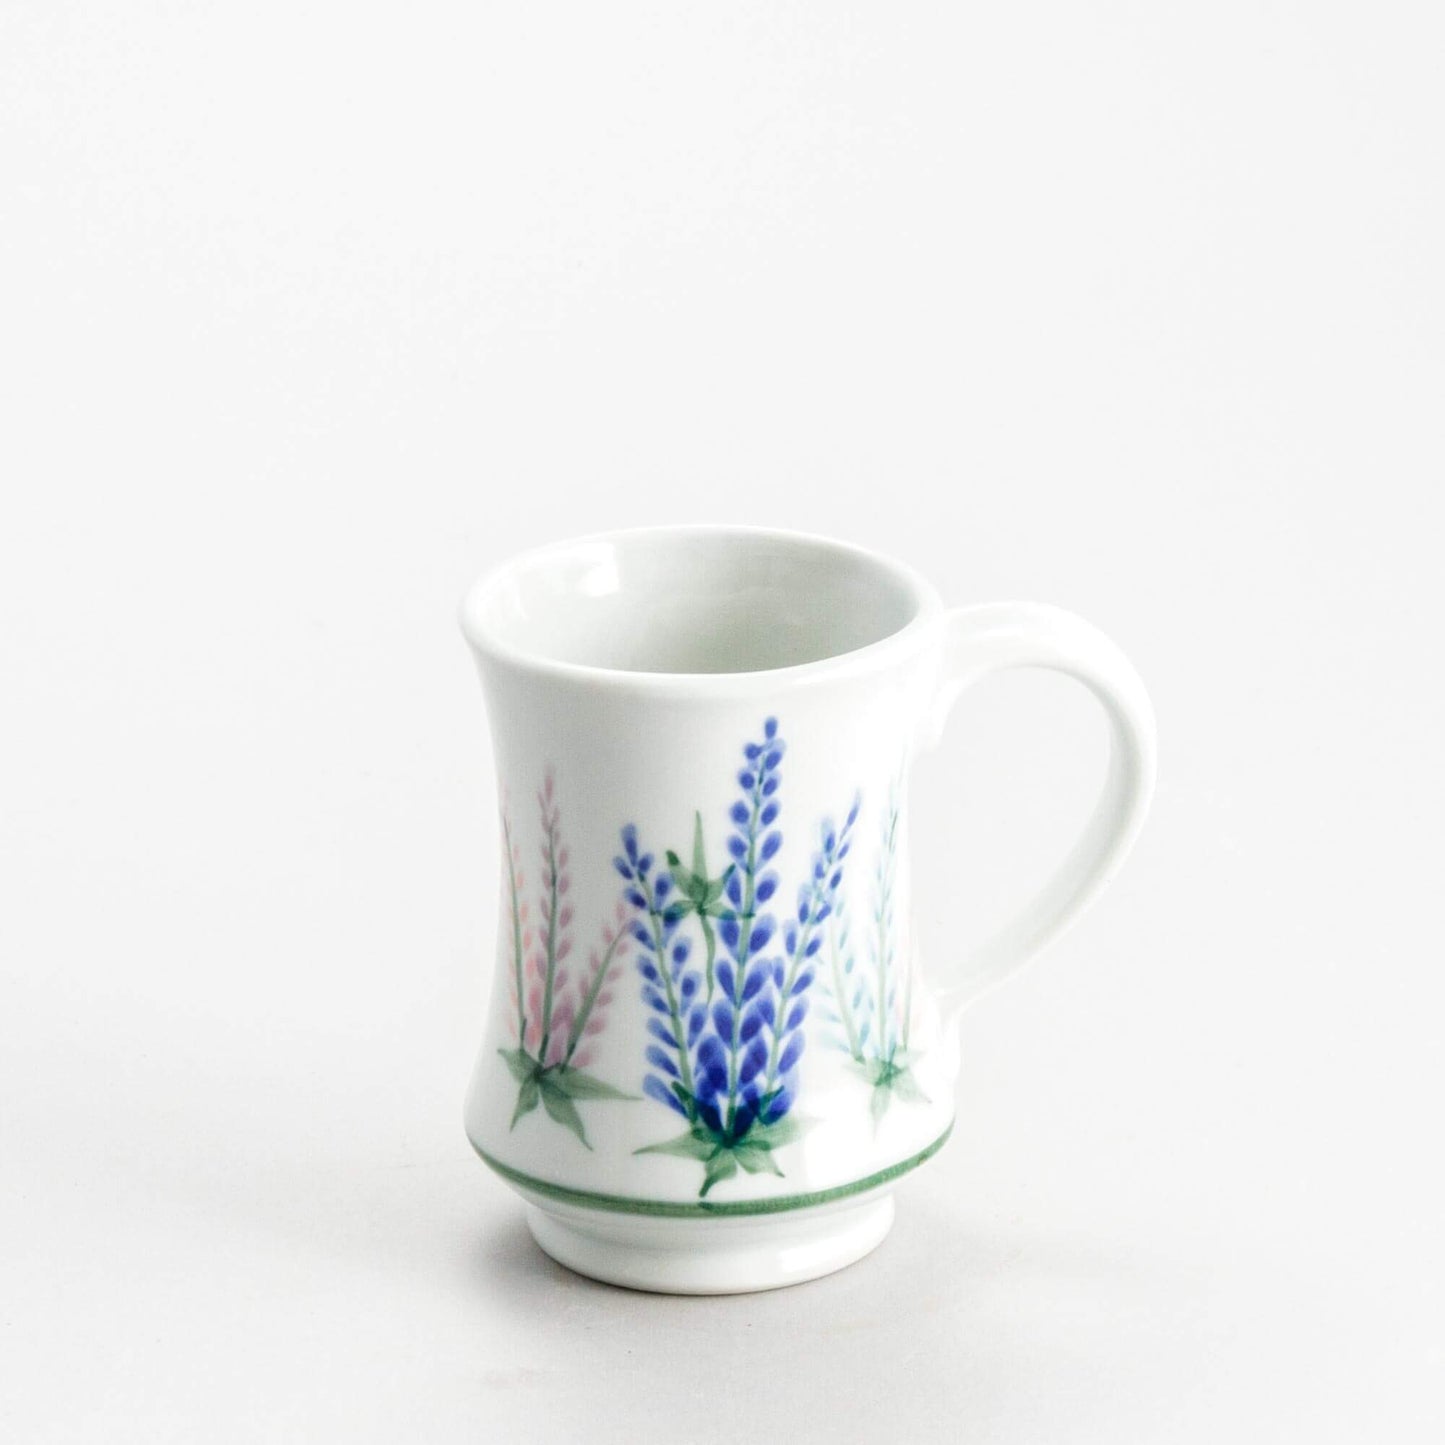 Handmade Pottery Pedestal Mug made by Georgetown Pottery in Maine Lupine